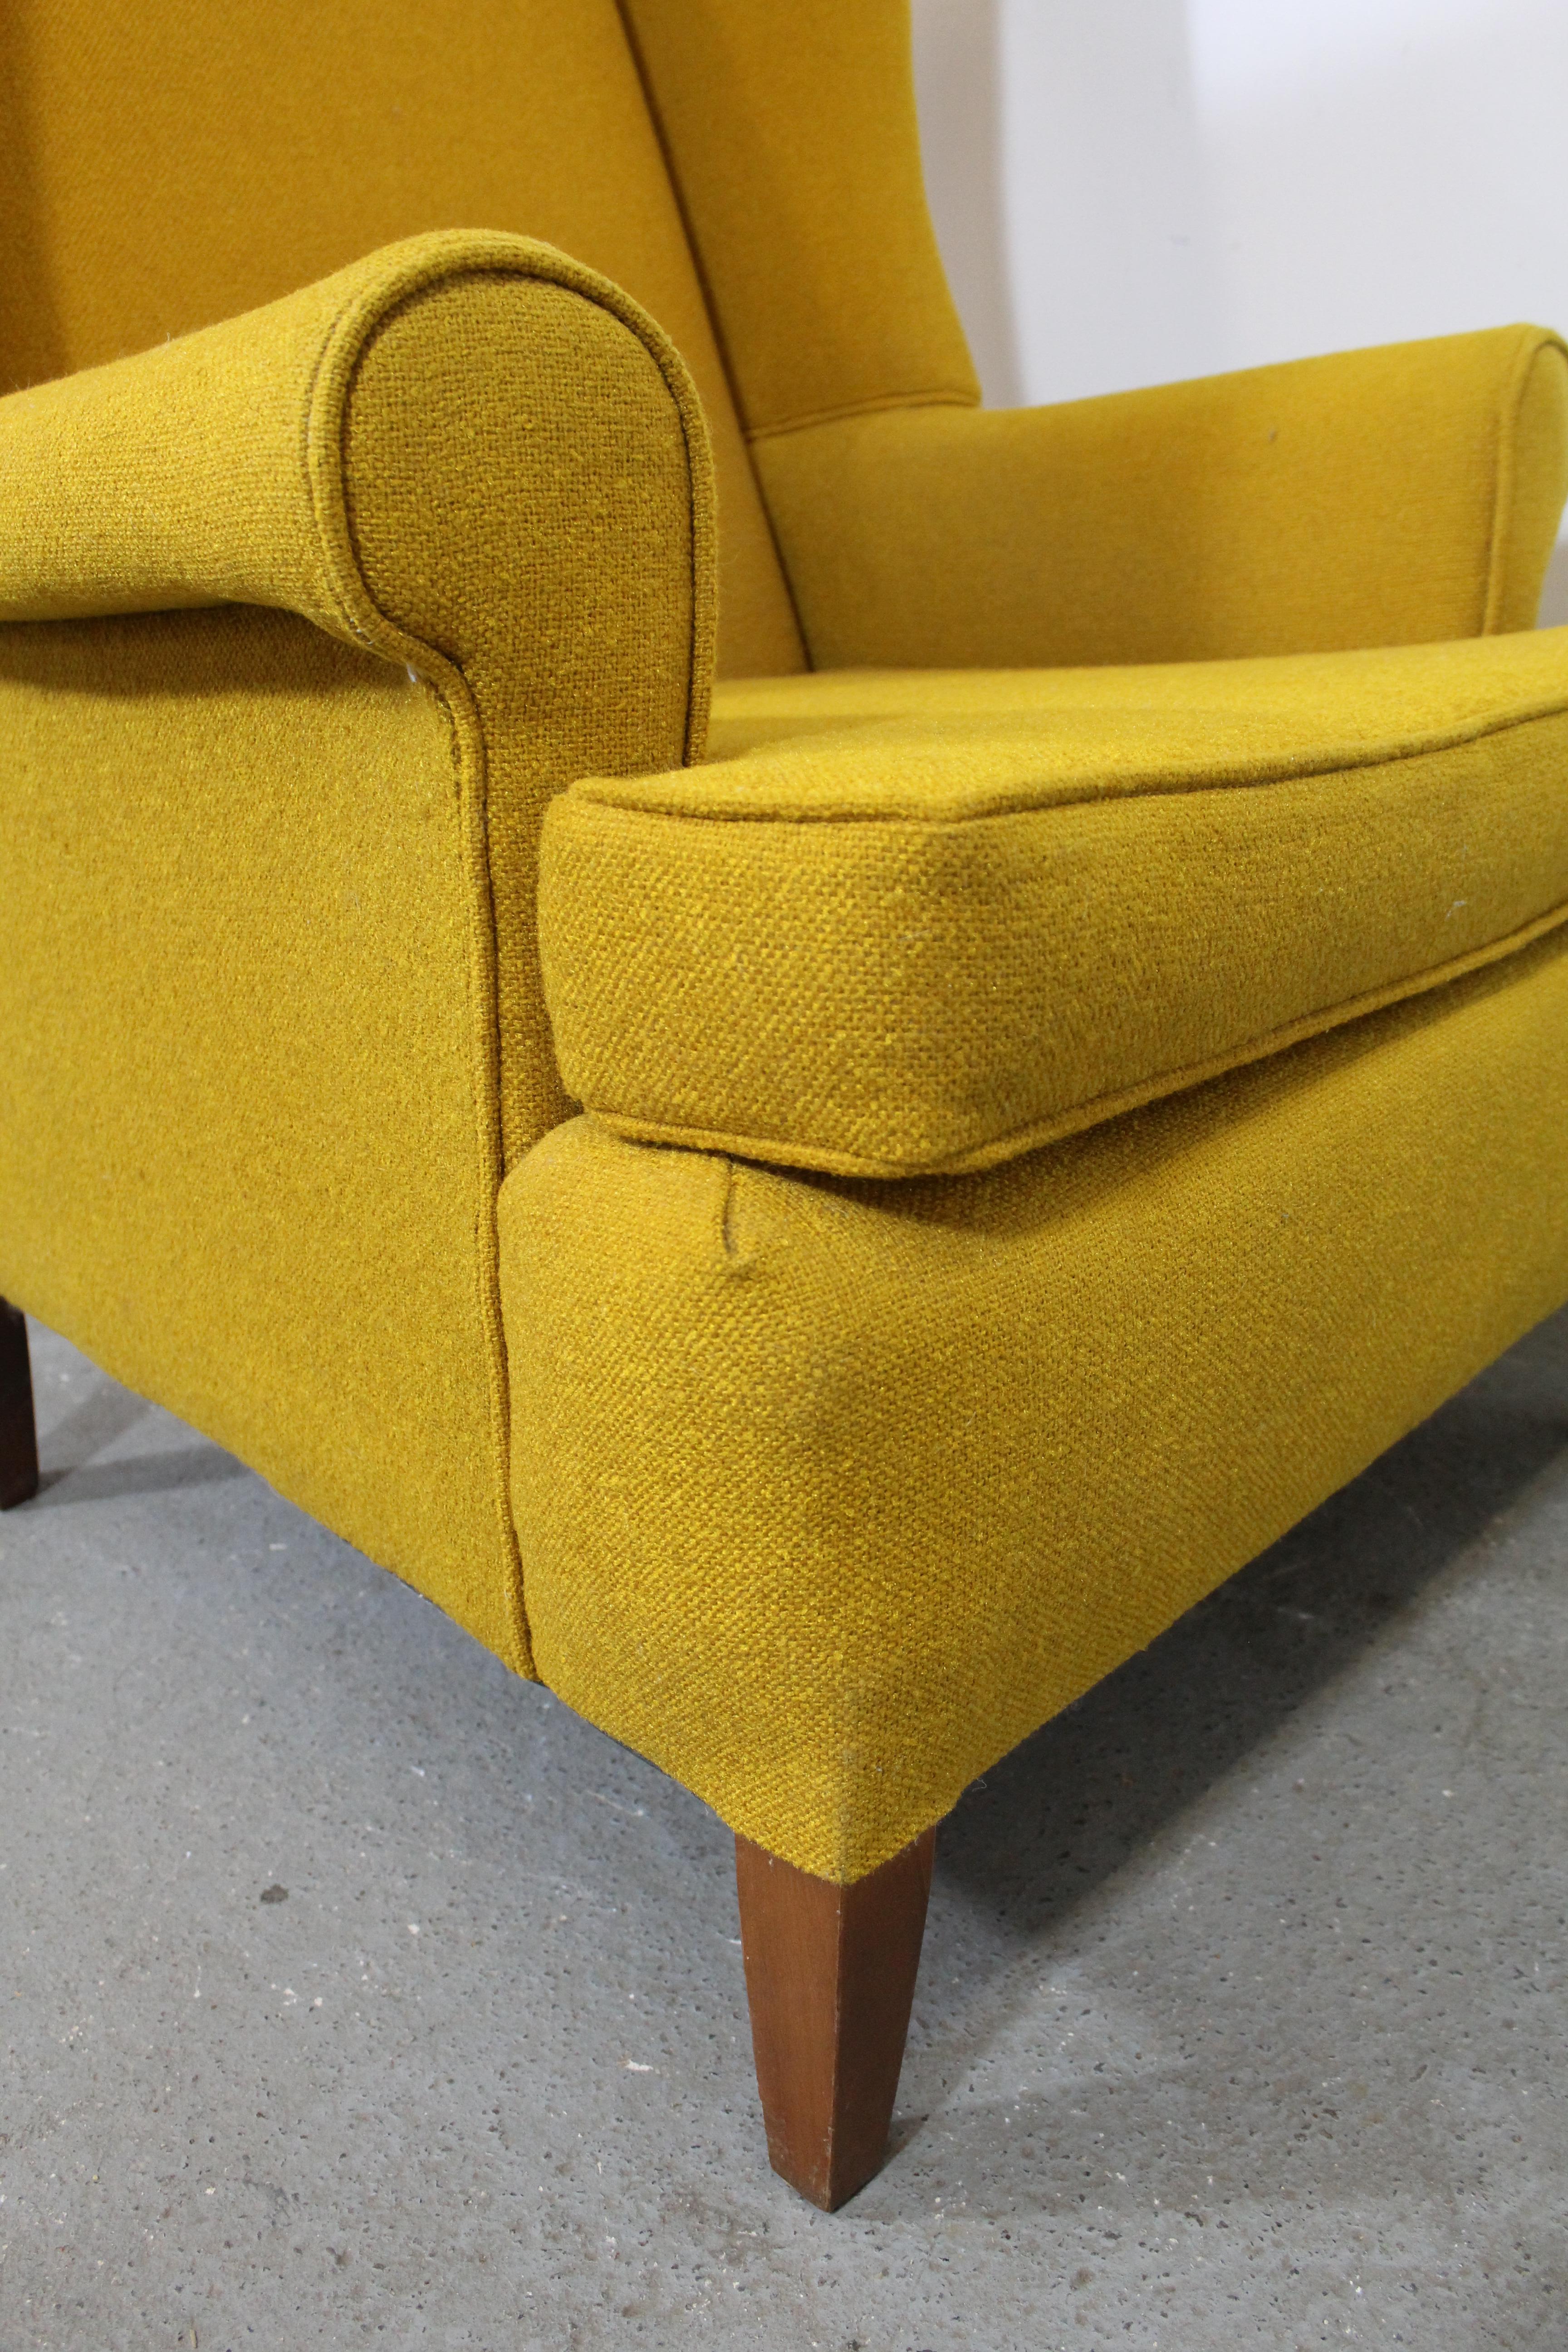 Upholstery Vintage Mid Century Fireside Wing Back Chair Mustard Yellow 